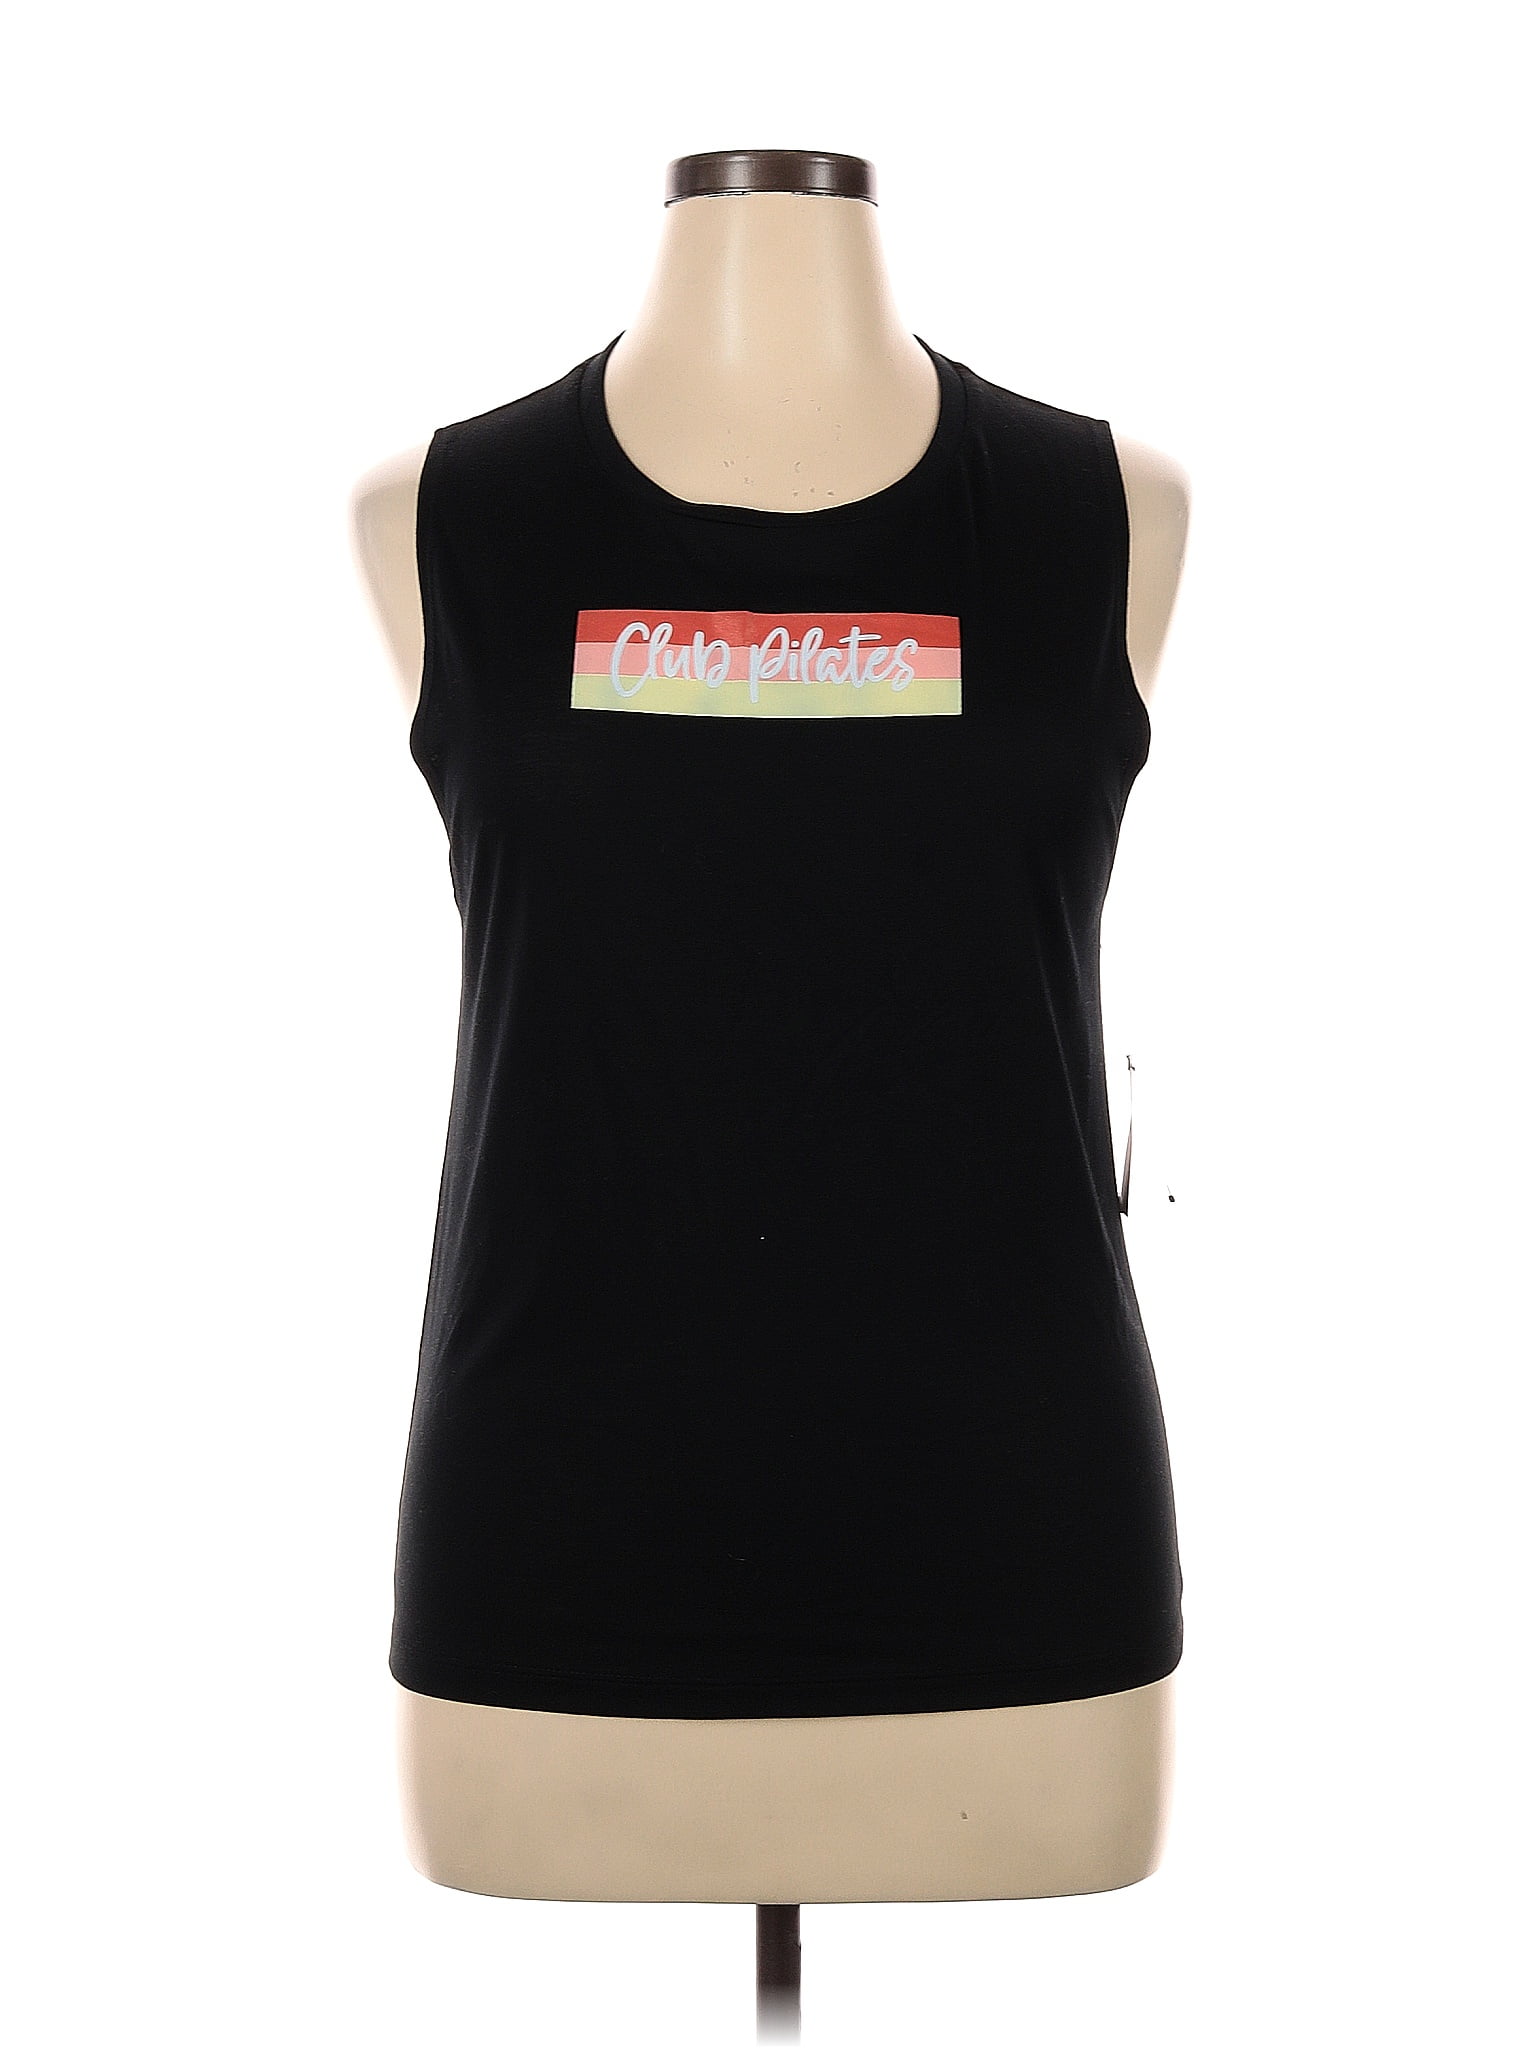 Club Pilates Women's Clothing On Sale Up To 90% Off Retail